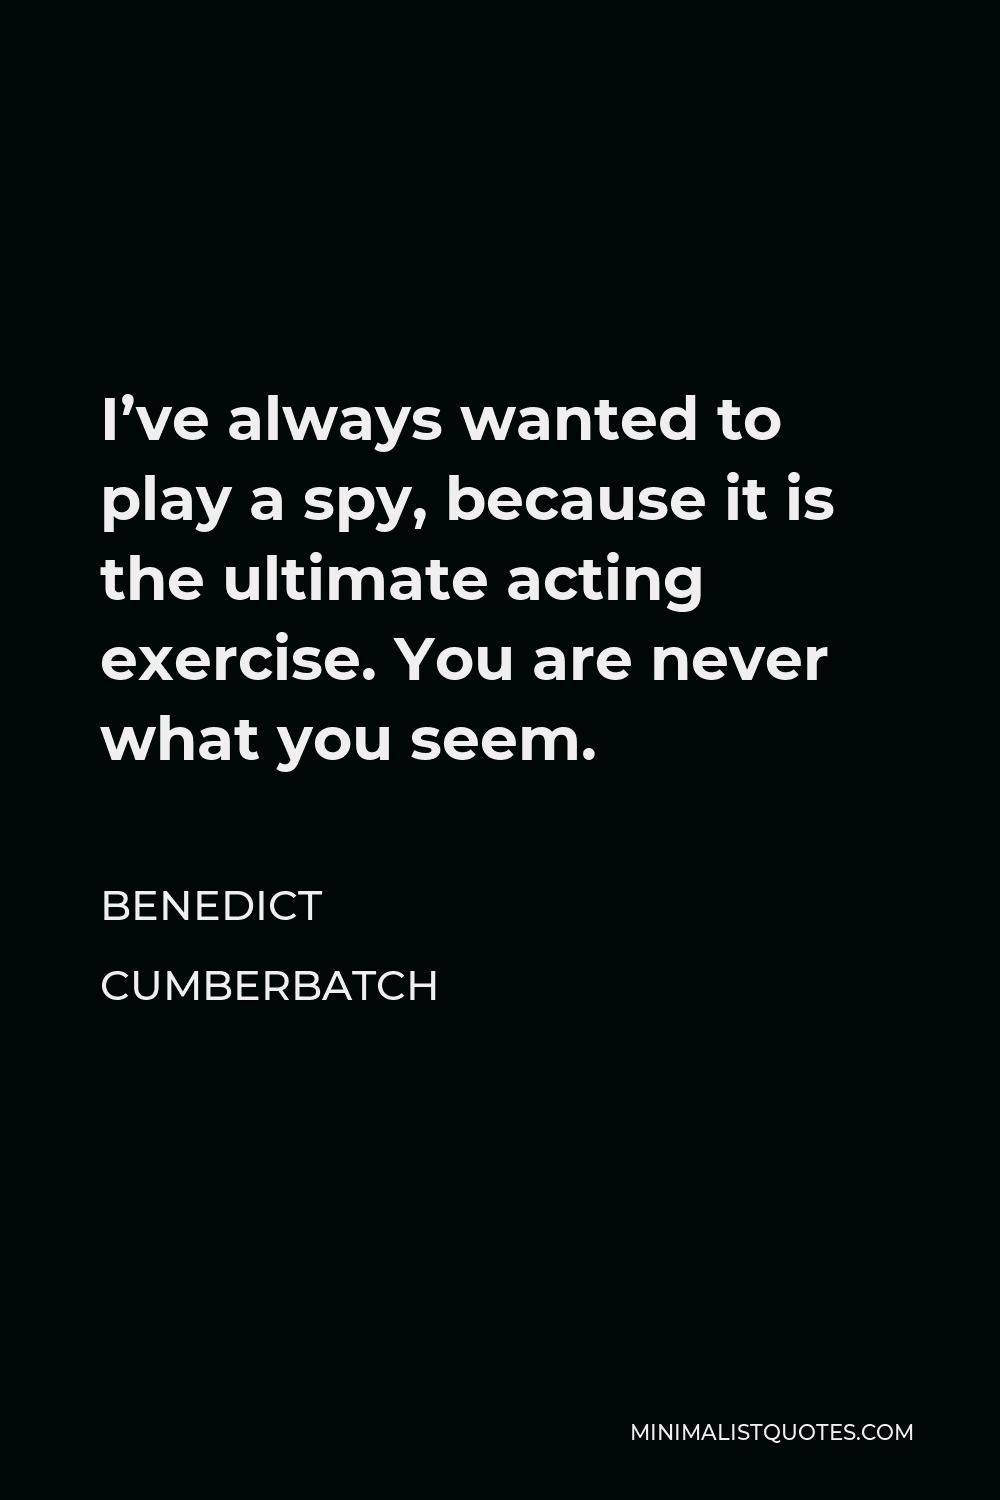 Benedict Cumberbatch Quote - I’ve always wanted to play a spy, because it is the ultimate acting exercise. You are never what you seem.